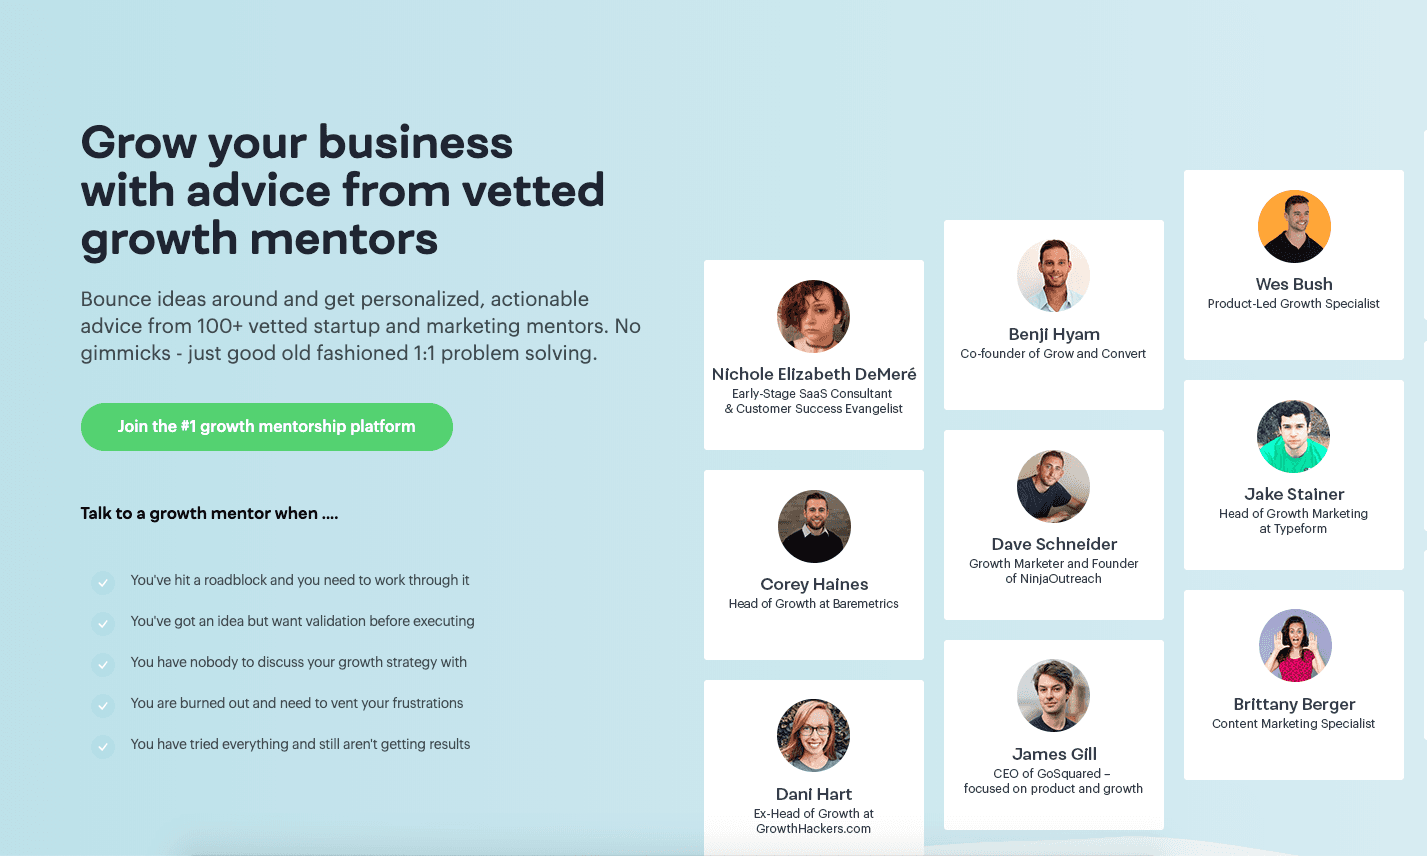 How GrowthMentor Drastically Reduced Their Support Tickets by 250% with Userpilot